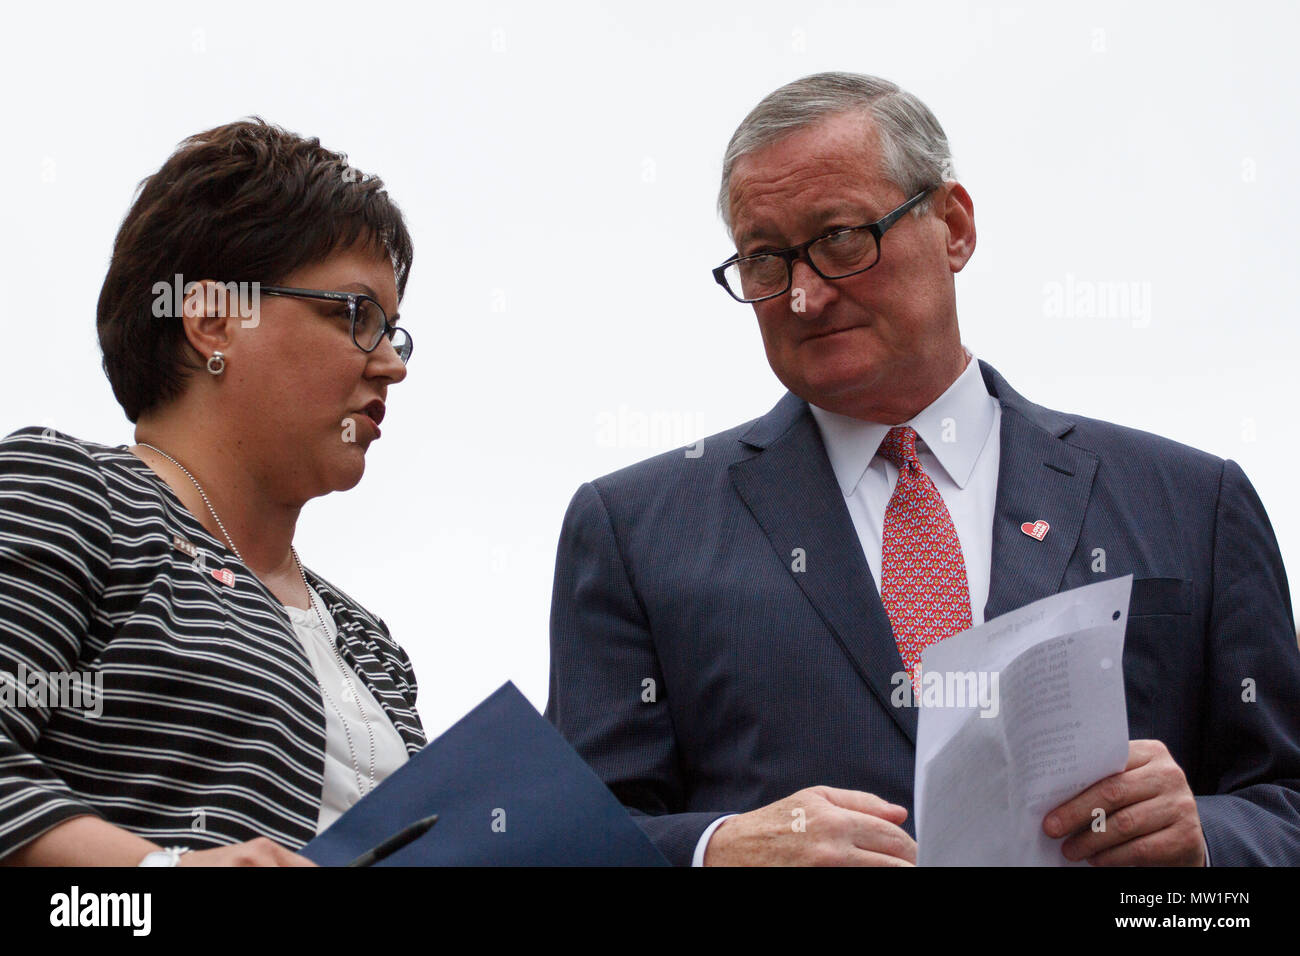 Philadelphia, United States. 30th May, 2018. Parks and Recreation Commissioner Kathryn Ott Lovell speaks with Mayor Jim Kenney before a ceremony re-opening the city's iconic Love Park, home of the famous LOVE statue by artist Robert Indiana, after more than two years of renovations. Credit: Michael Candelori/Pacific Press/Alamy Live News Stock Photo